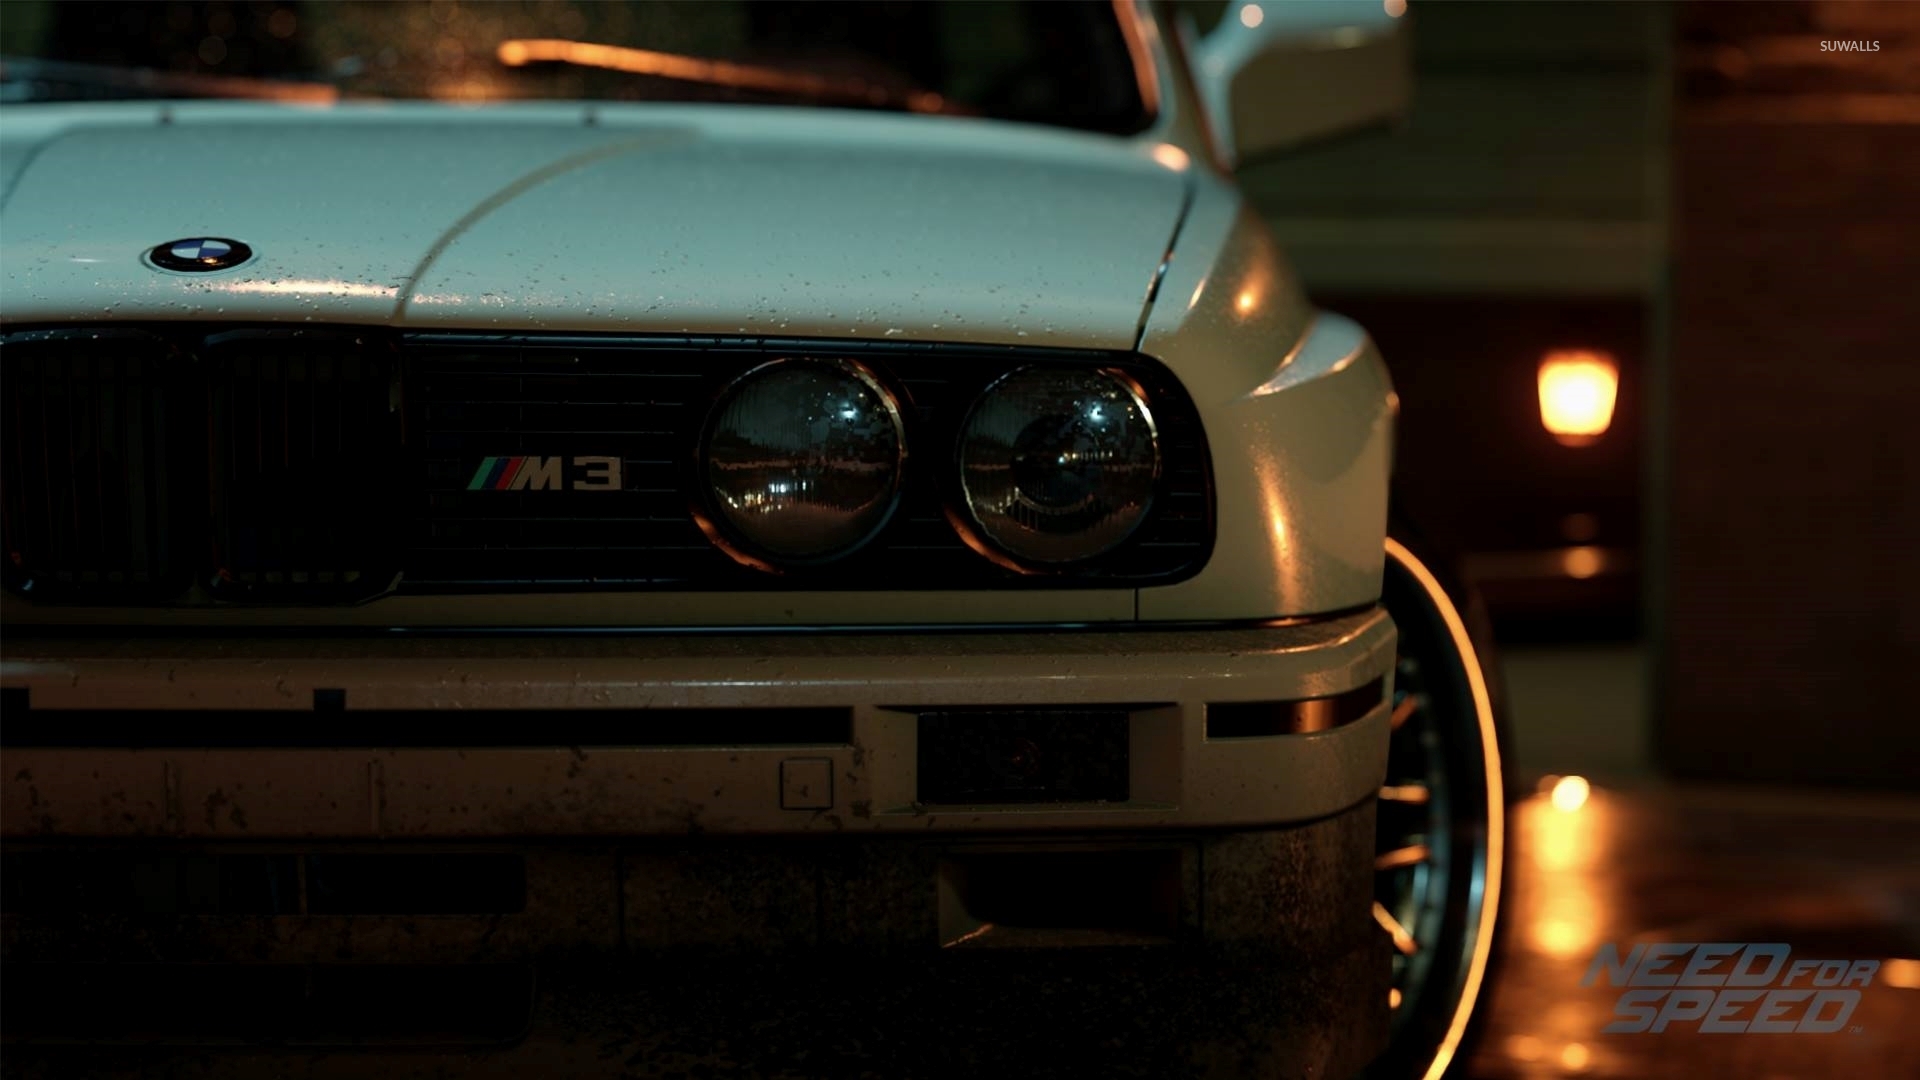 Need For Speed Wallpaper - Bmw E30 Need For Speed , HD Wallpaper & Backgrounds